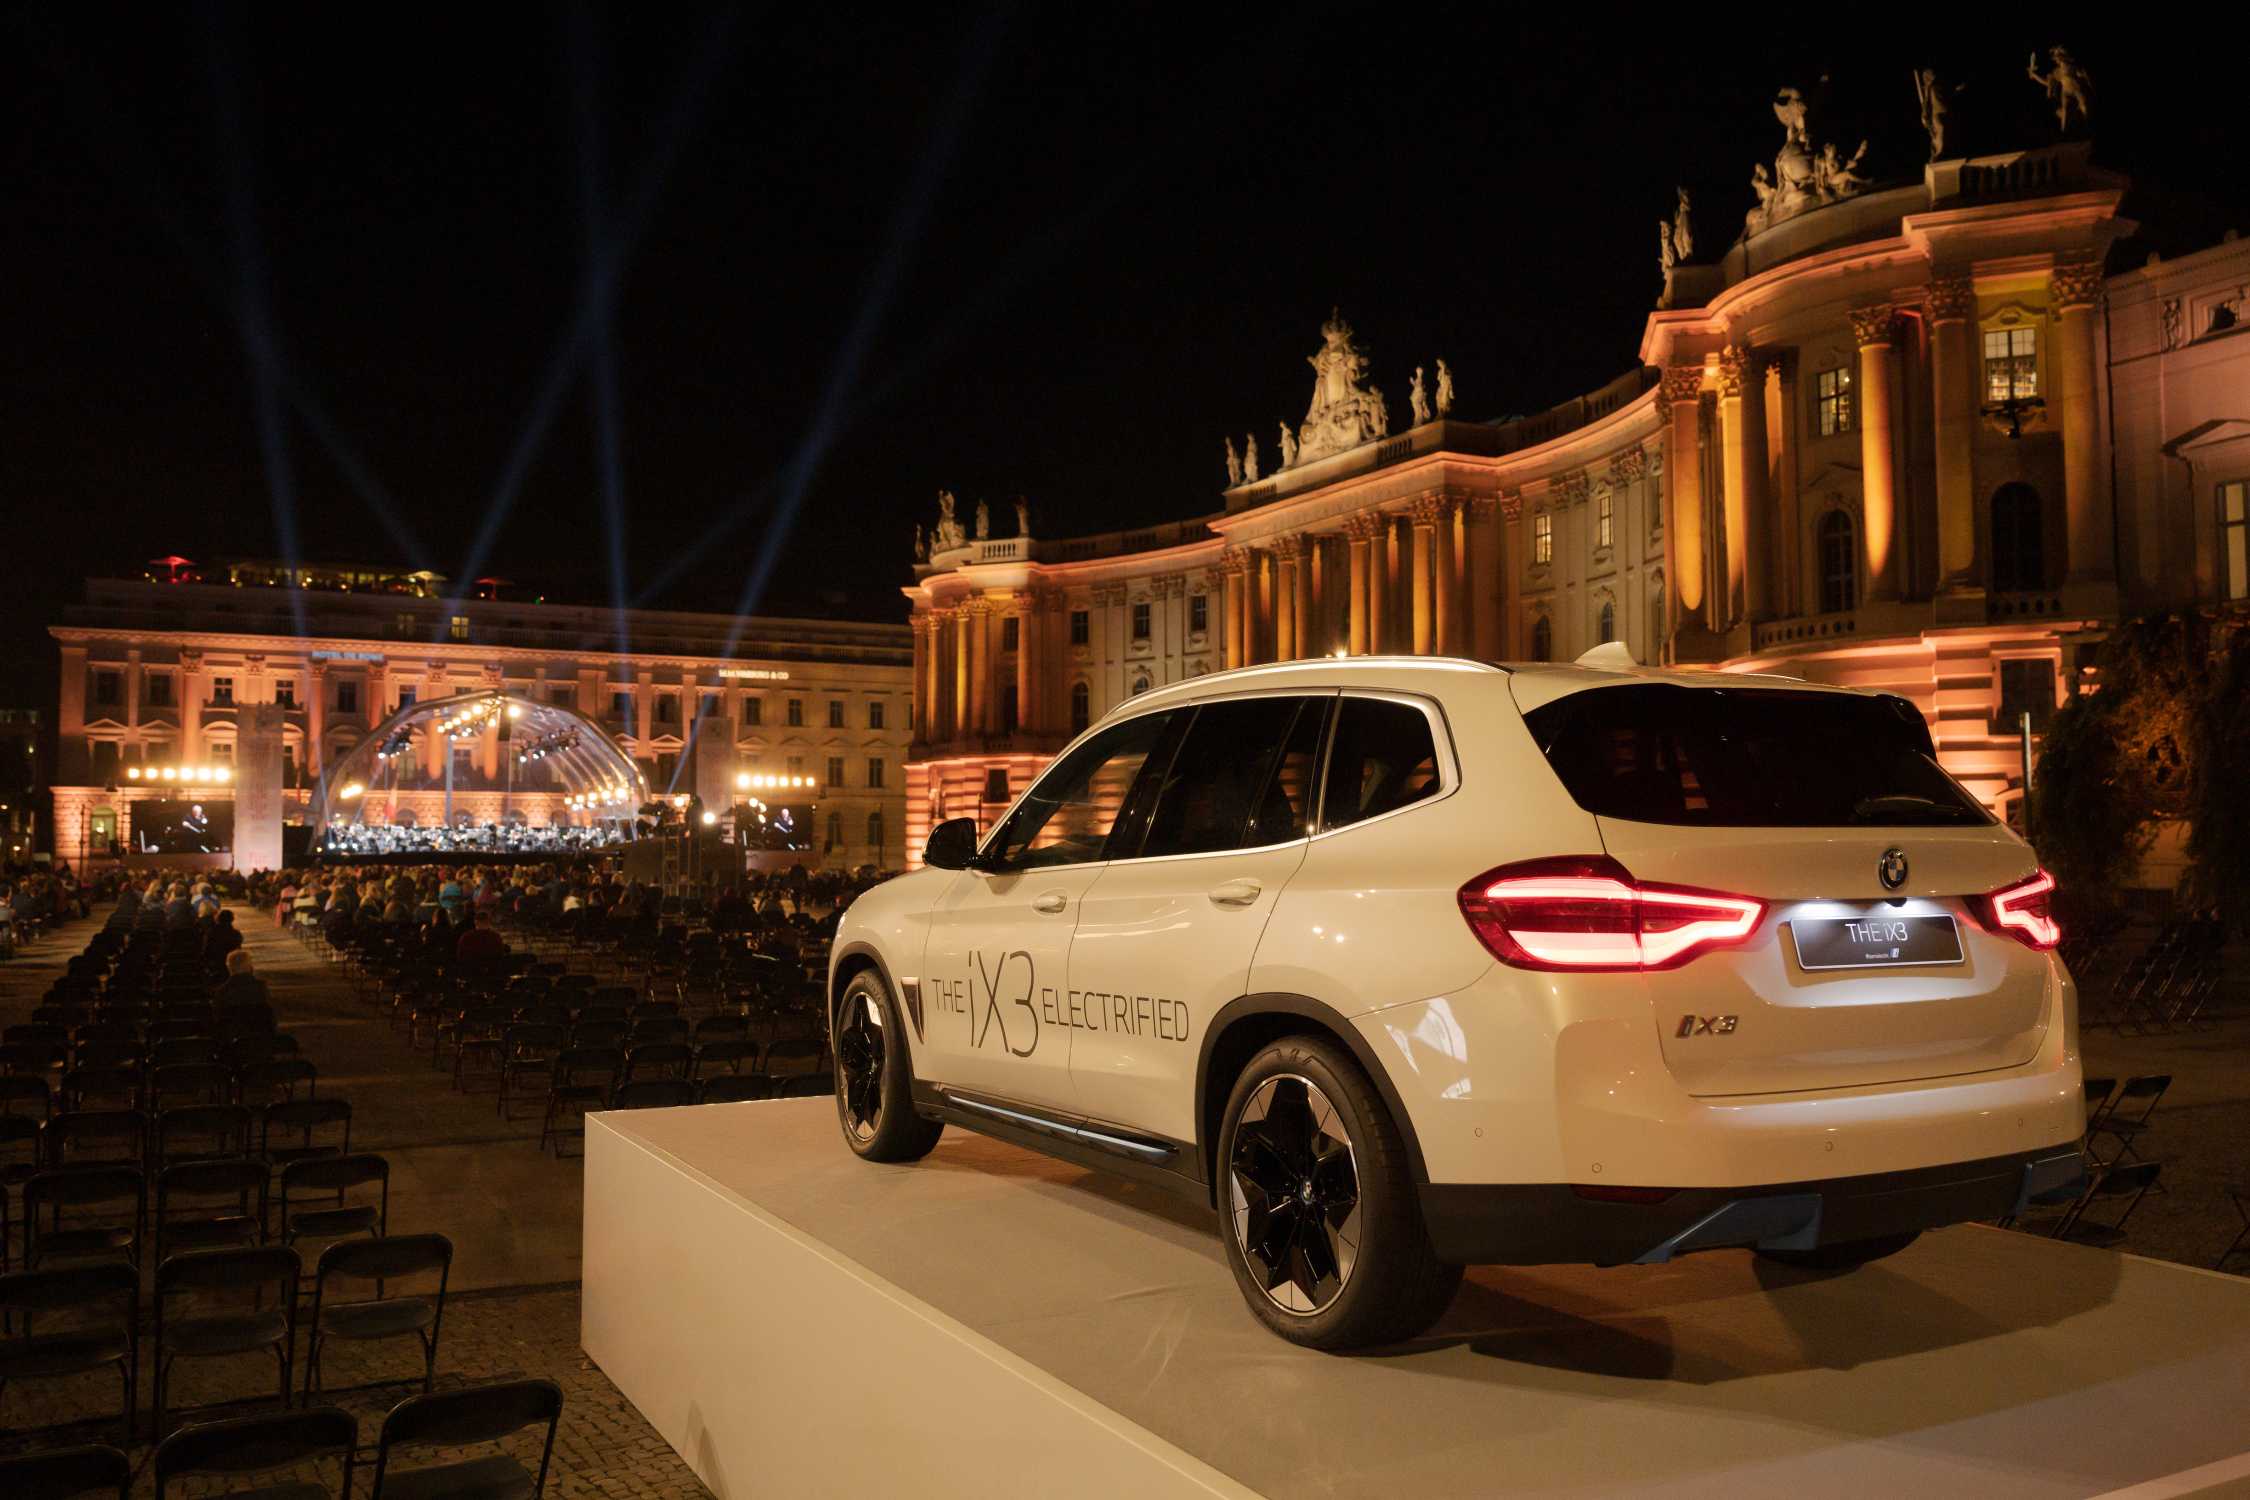 State Opera For All 2020 Presentation Of The Bmw Ix3 At The Bebelplatz In Berlin Photo Peter Adamik 09 2020